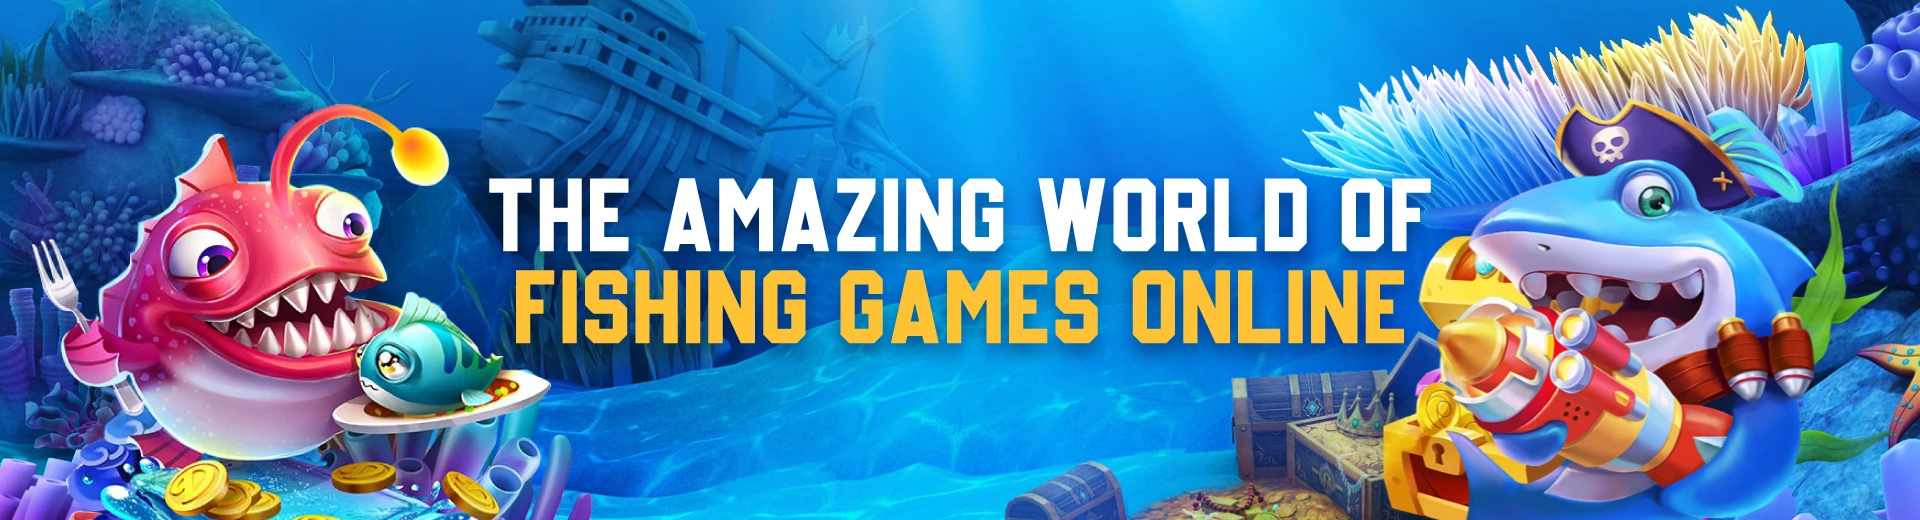 The-amazing-world-of-Fishing-Games-Online-banner